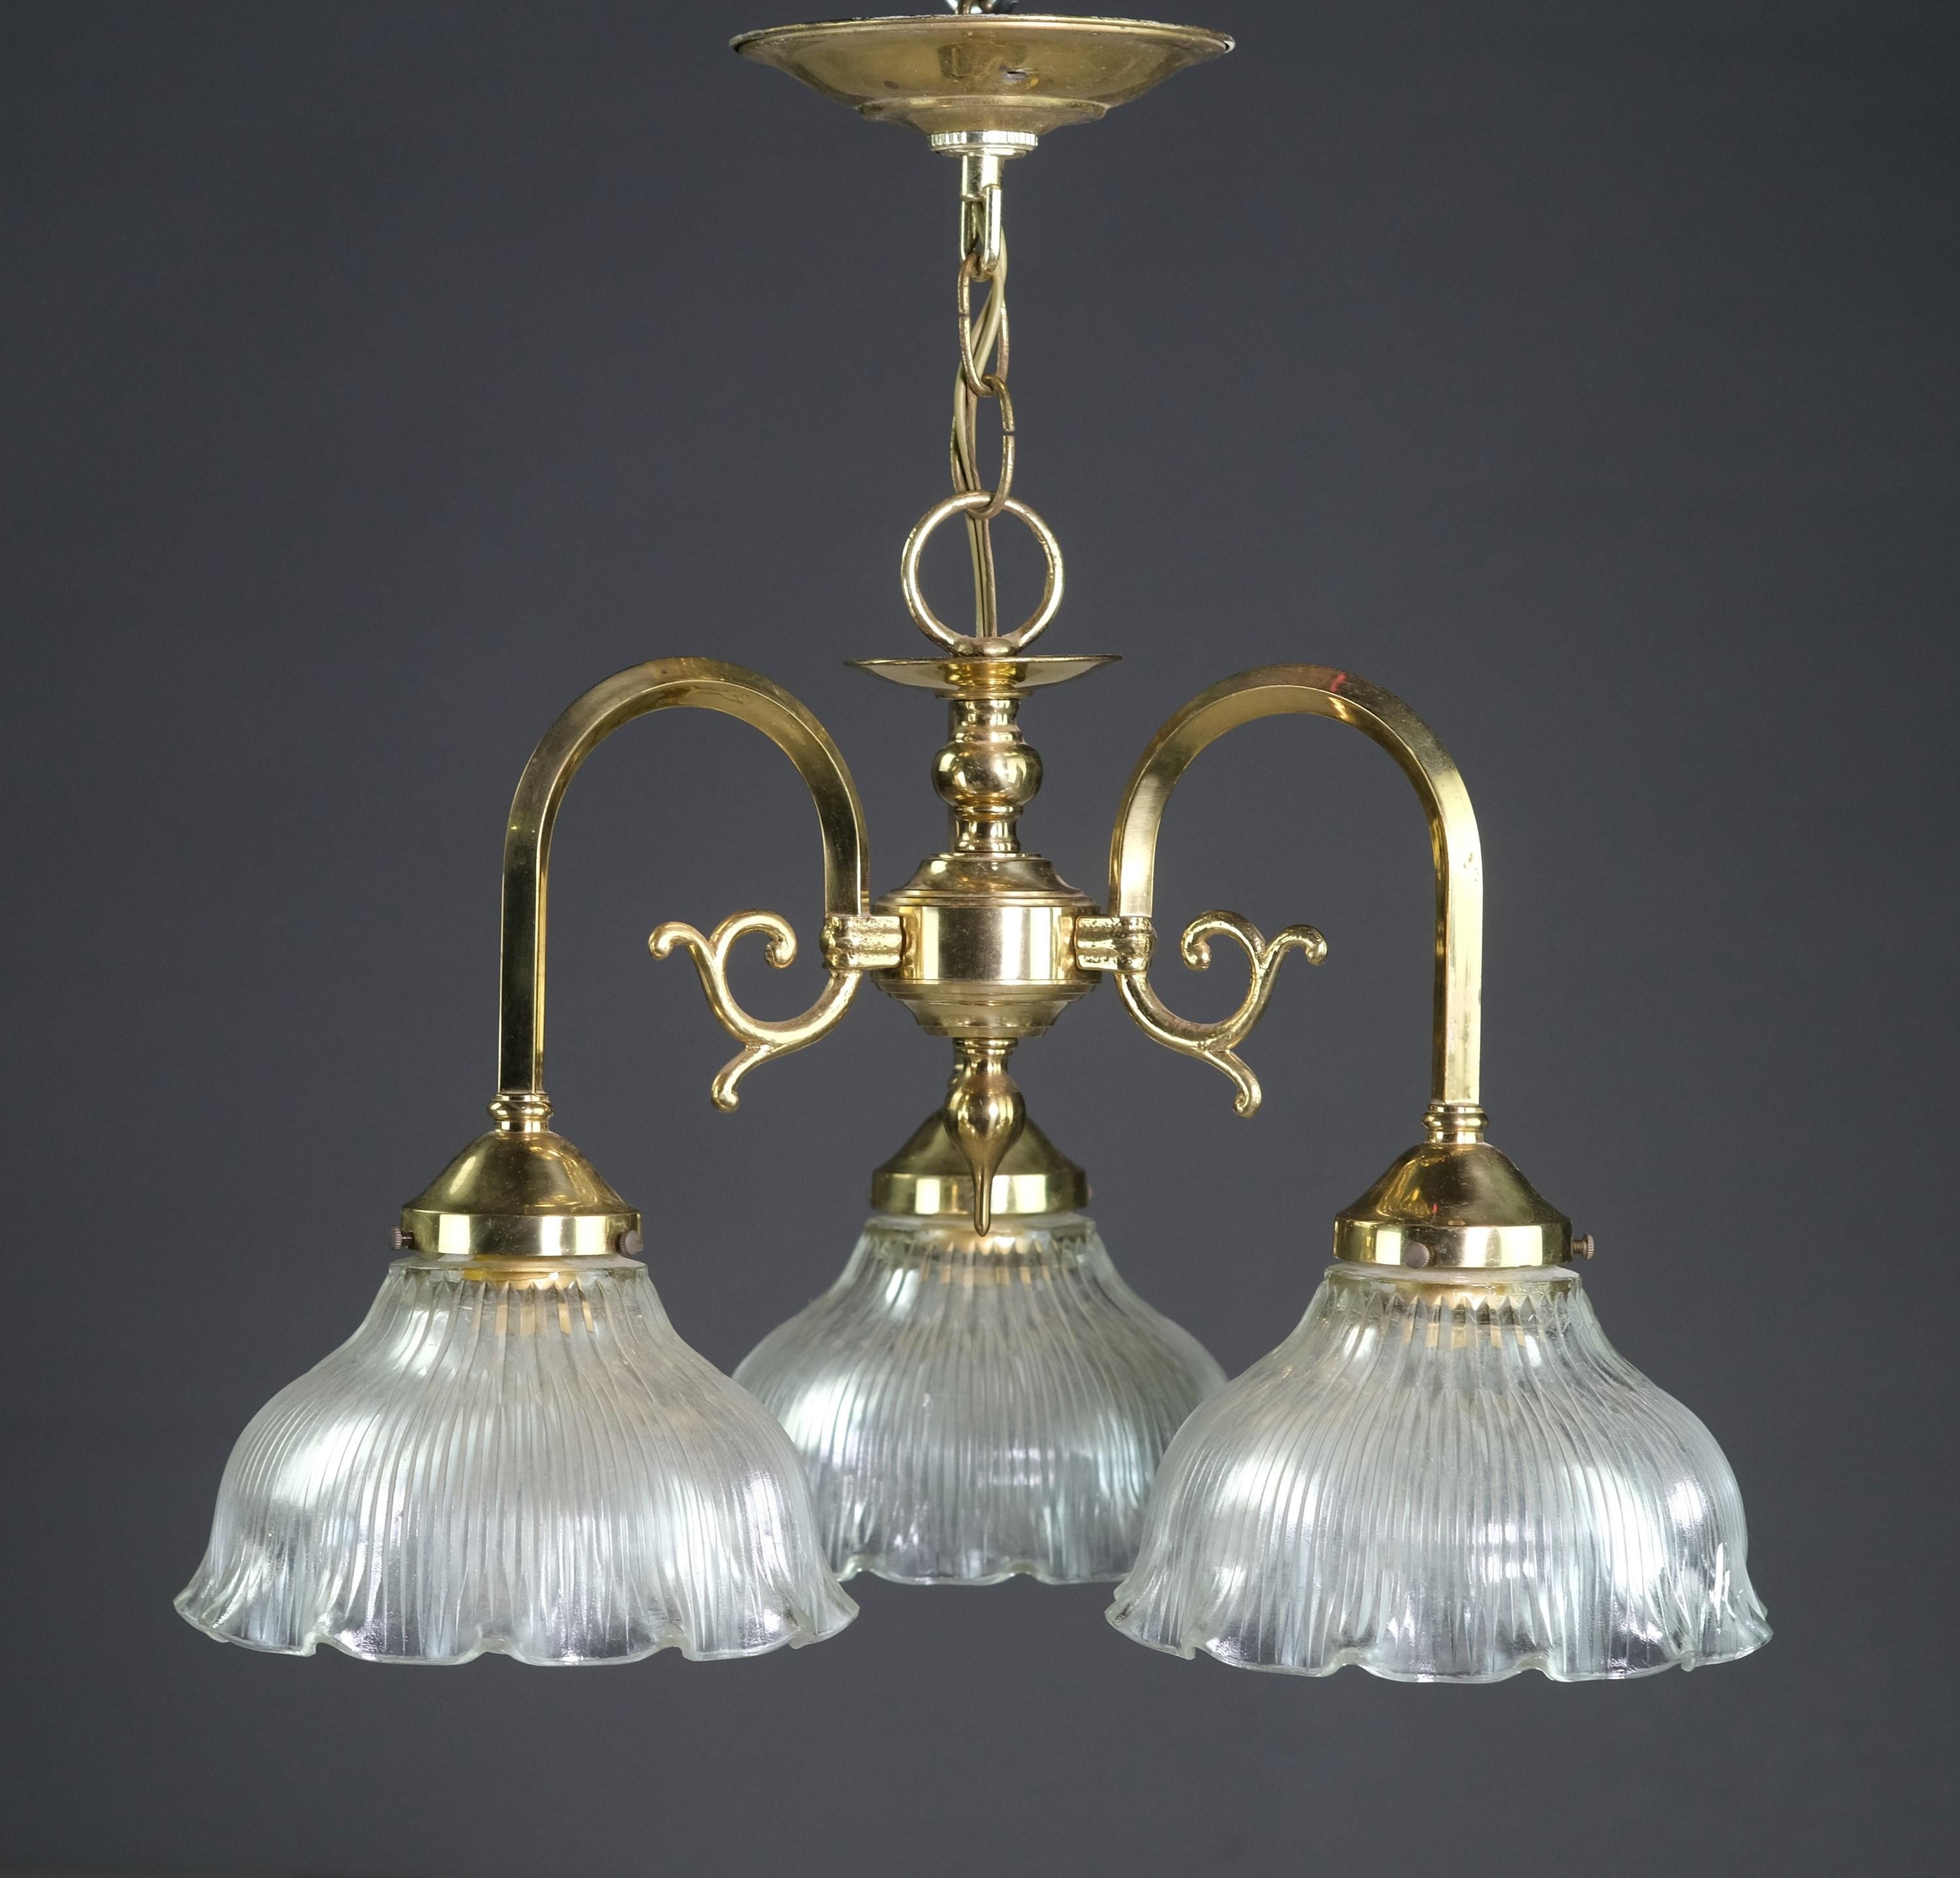 Polished brass three arm down light chandelier with clear fluted and ruffled glass shades. 20th Century pendant light done in polished brass. Features 3 Holophane tulip style ribbed shades. Takes 3 standard medium base lightbulbs. Cleaned and